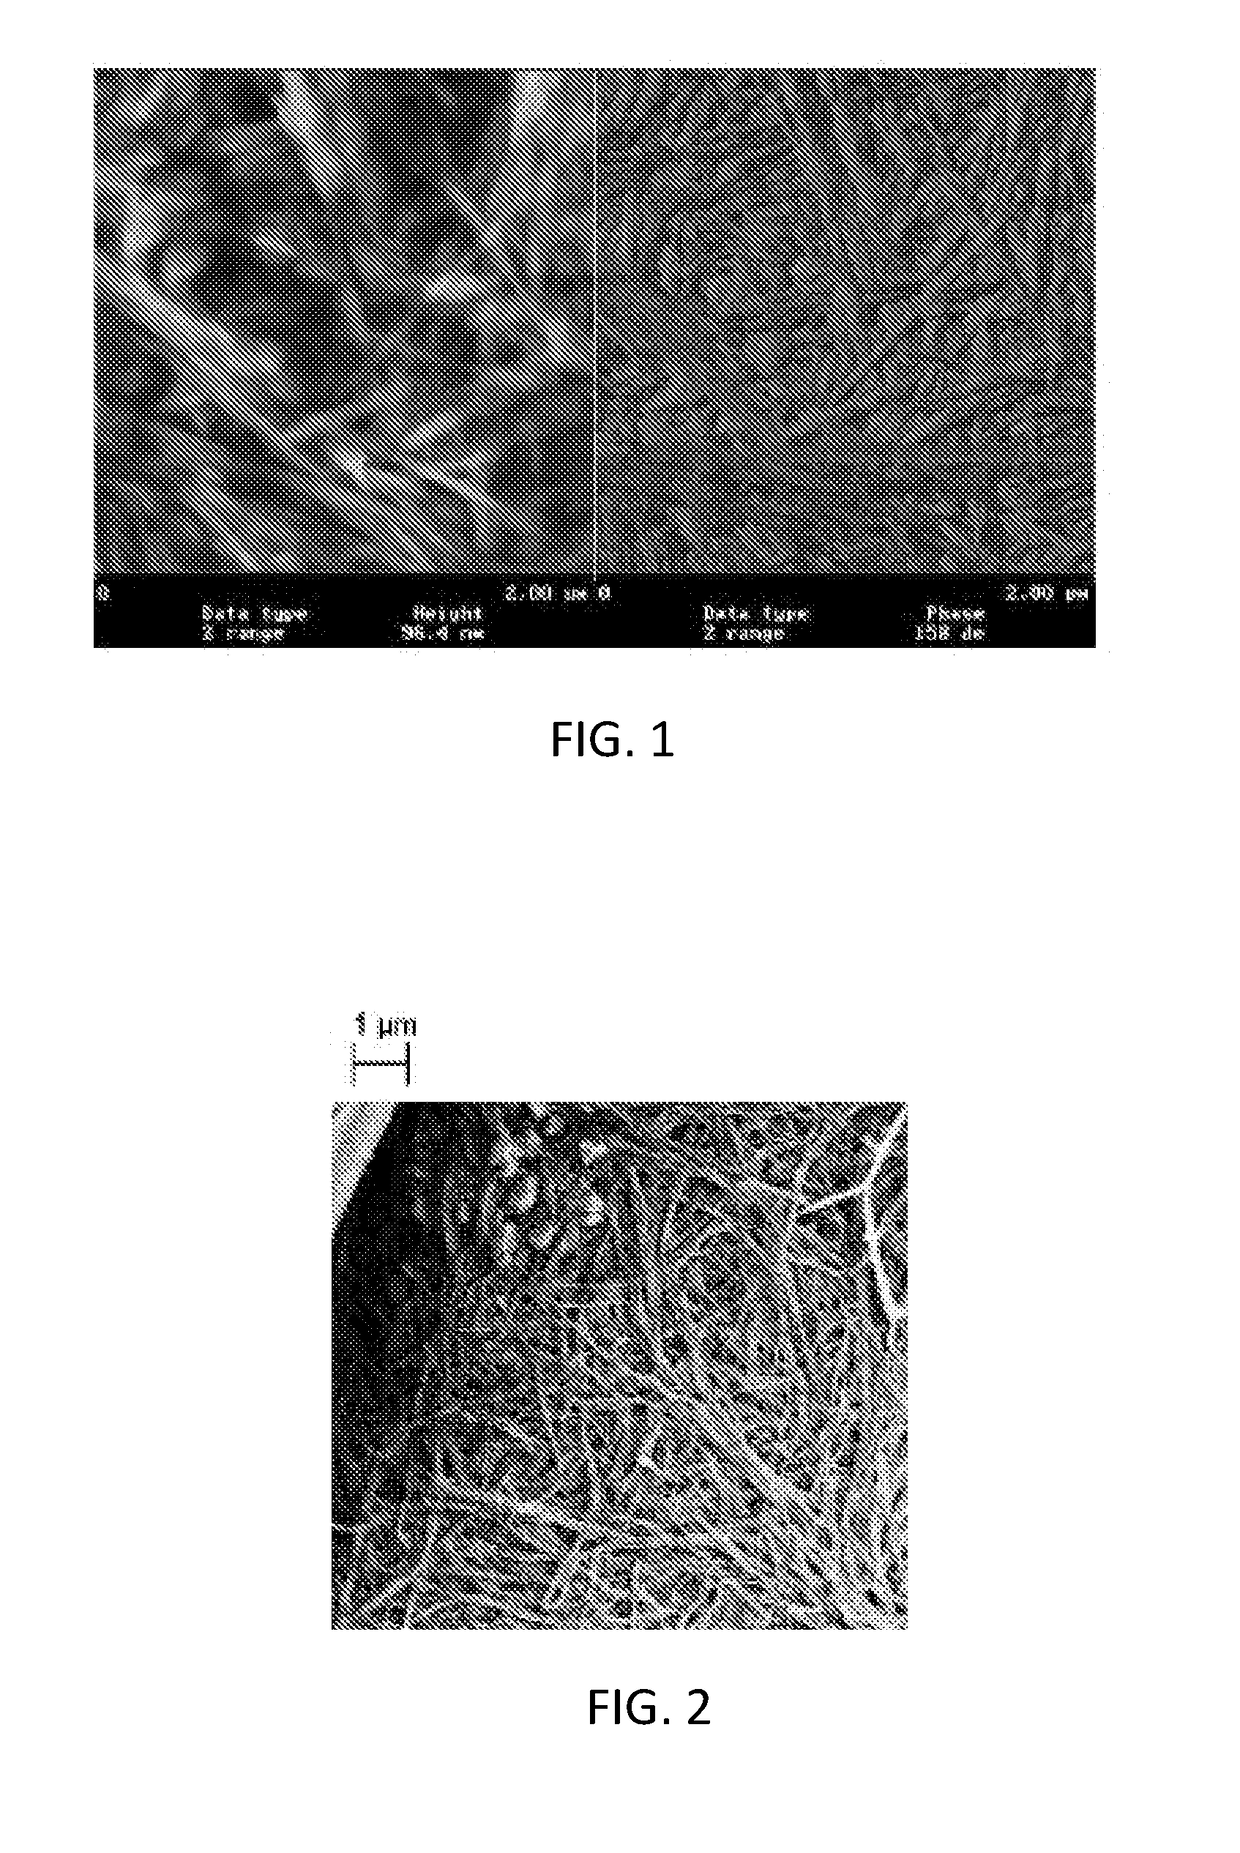 Cellulose nanofibrillar bioink for 3D bioprinting for cell culturing, tissue engineering and regenerative medicine applications